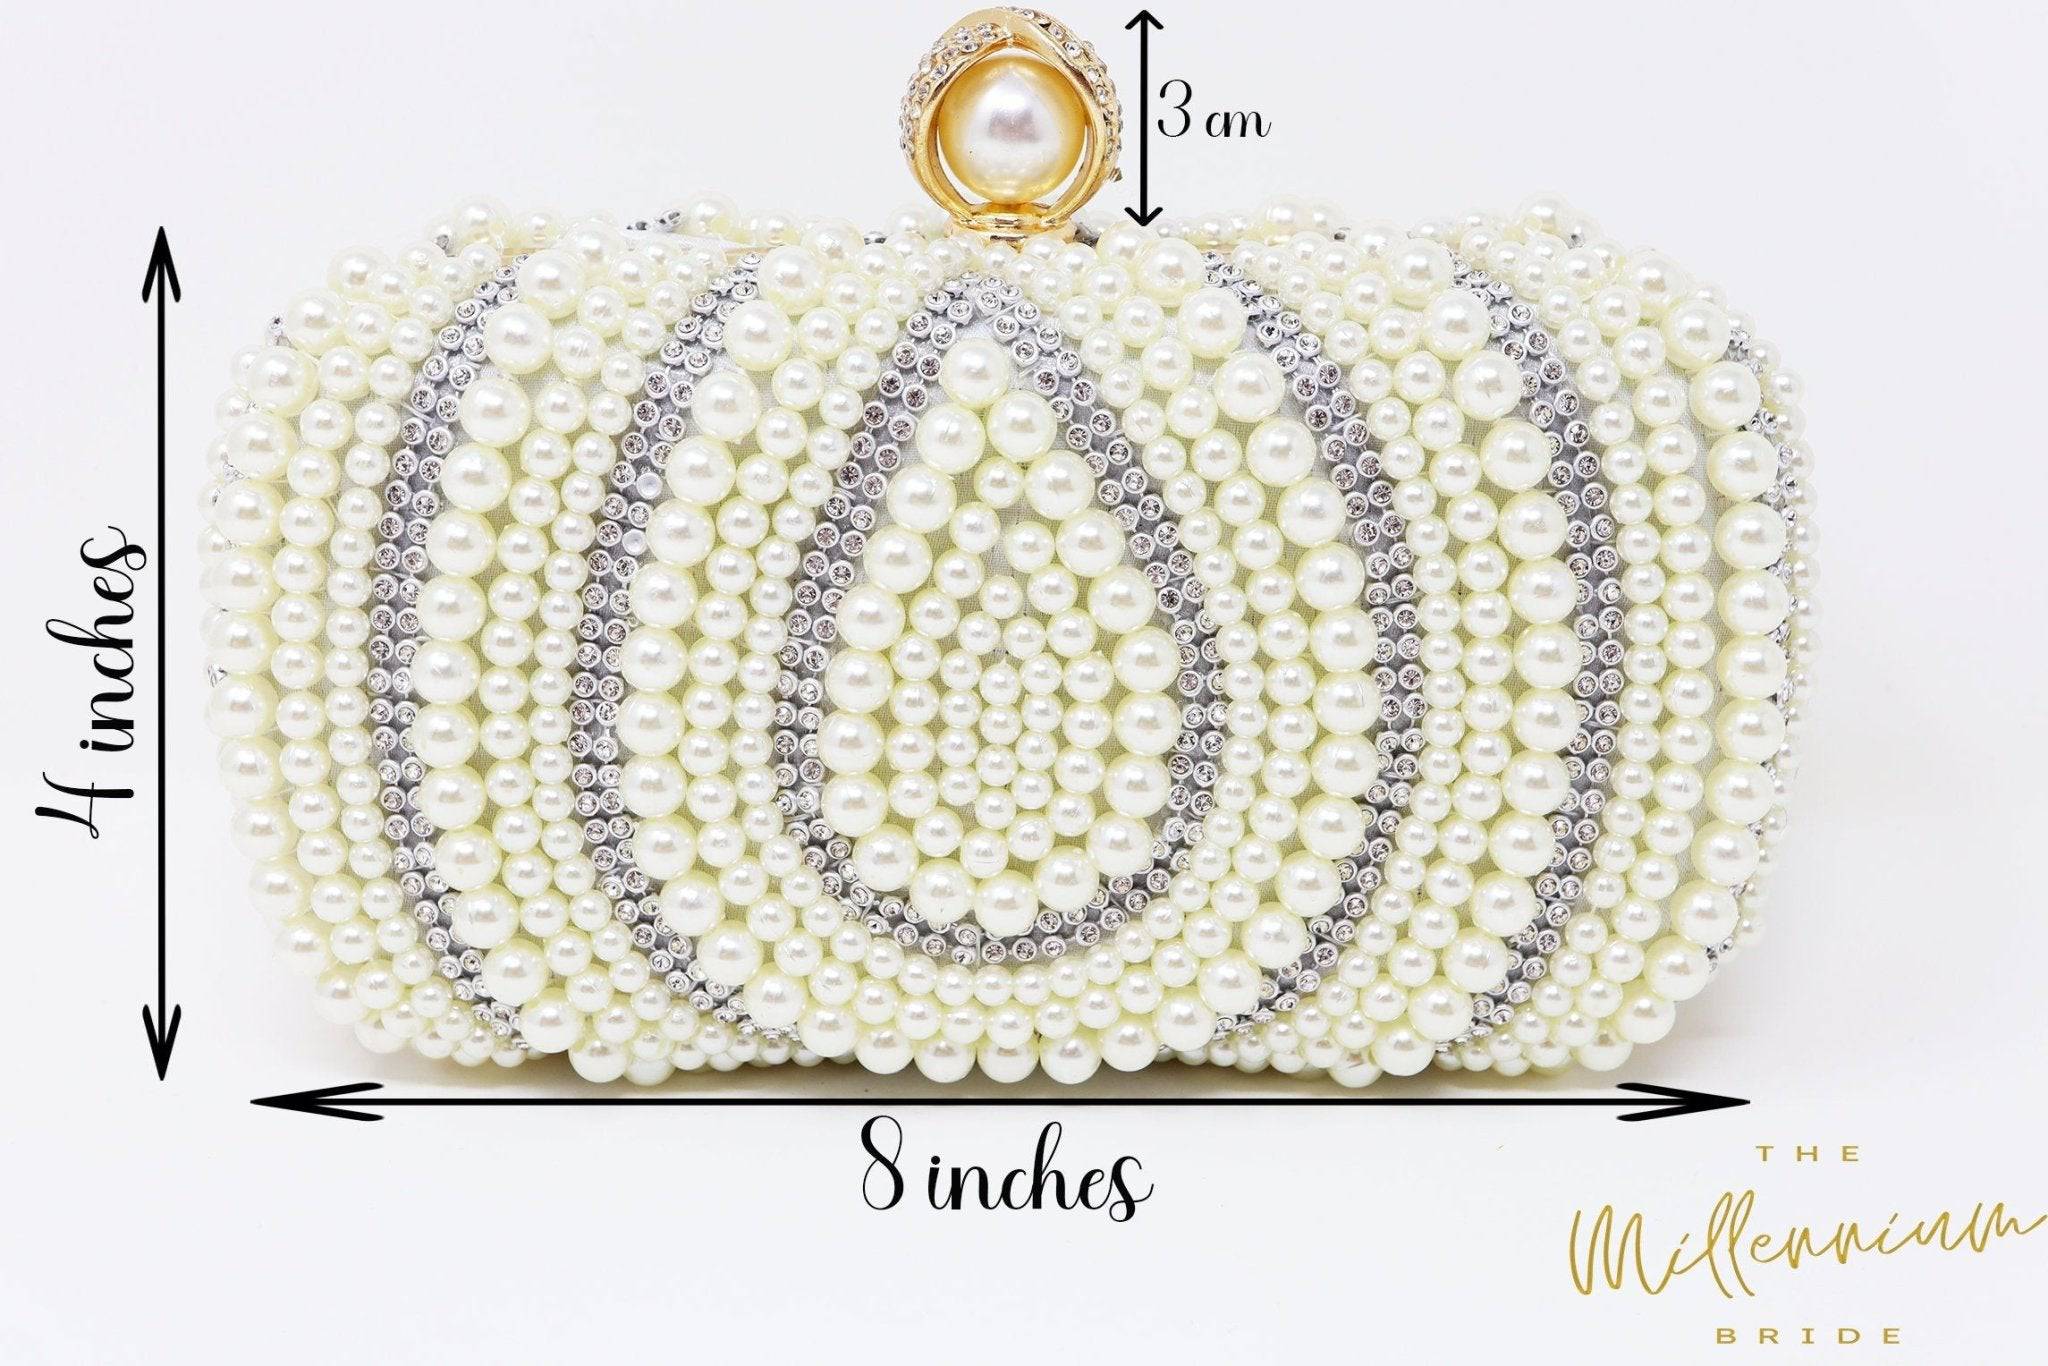 Bridal Clutch Bag Designer Heavy Beaded Embroidered Handmade Purse Indian  Handbag Engagement Gifts Bridesmaid Gifts Anniversary Gifts - Etsy